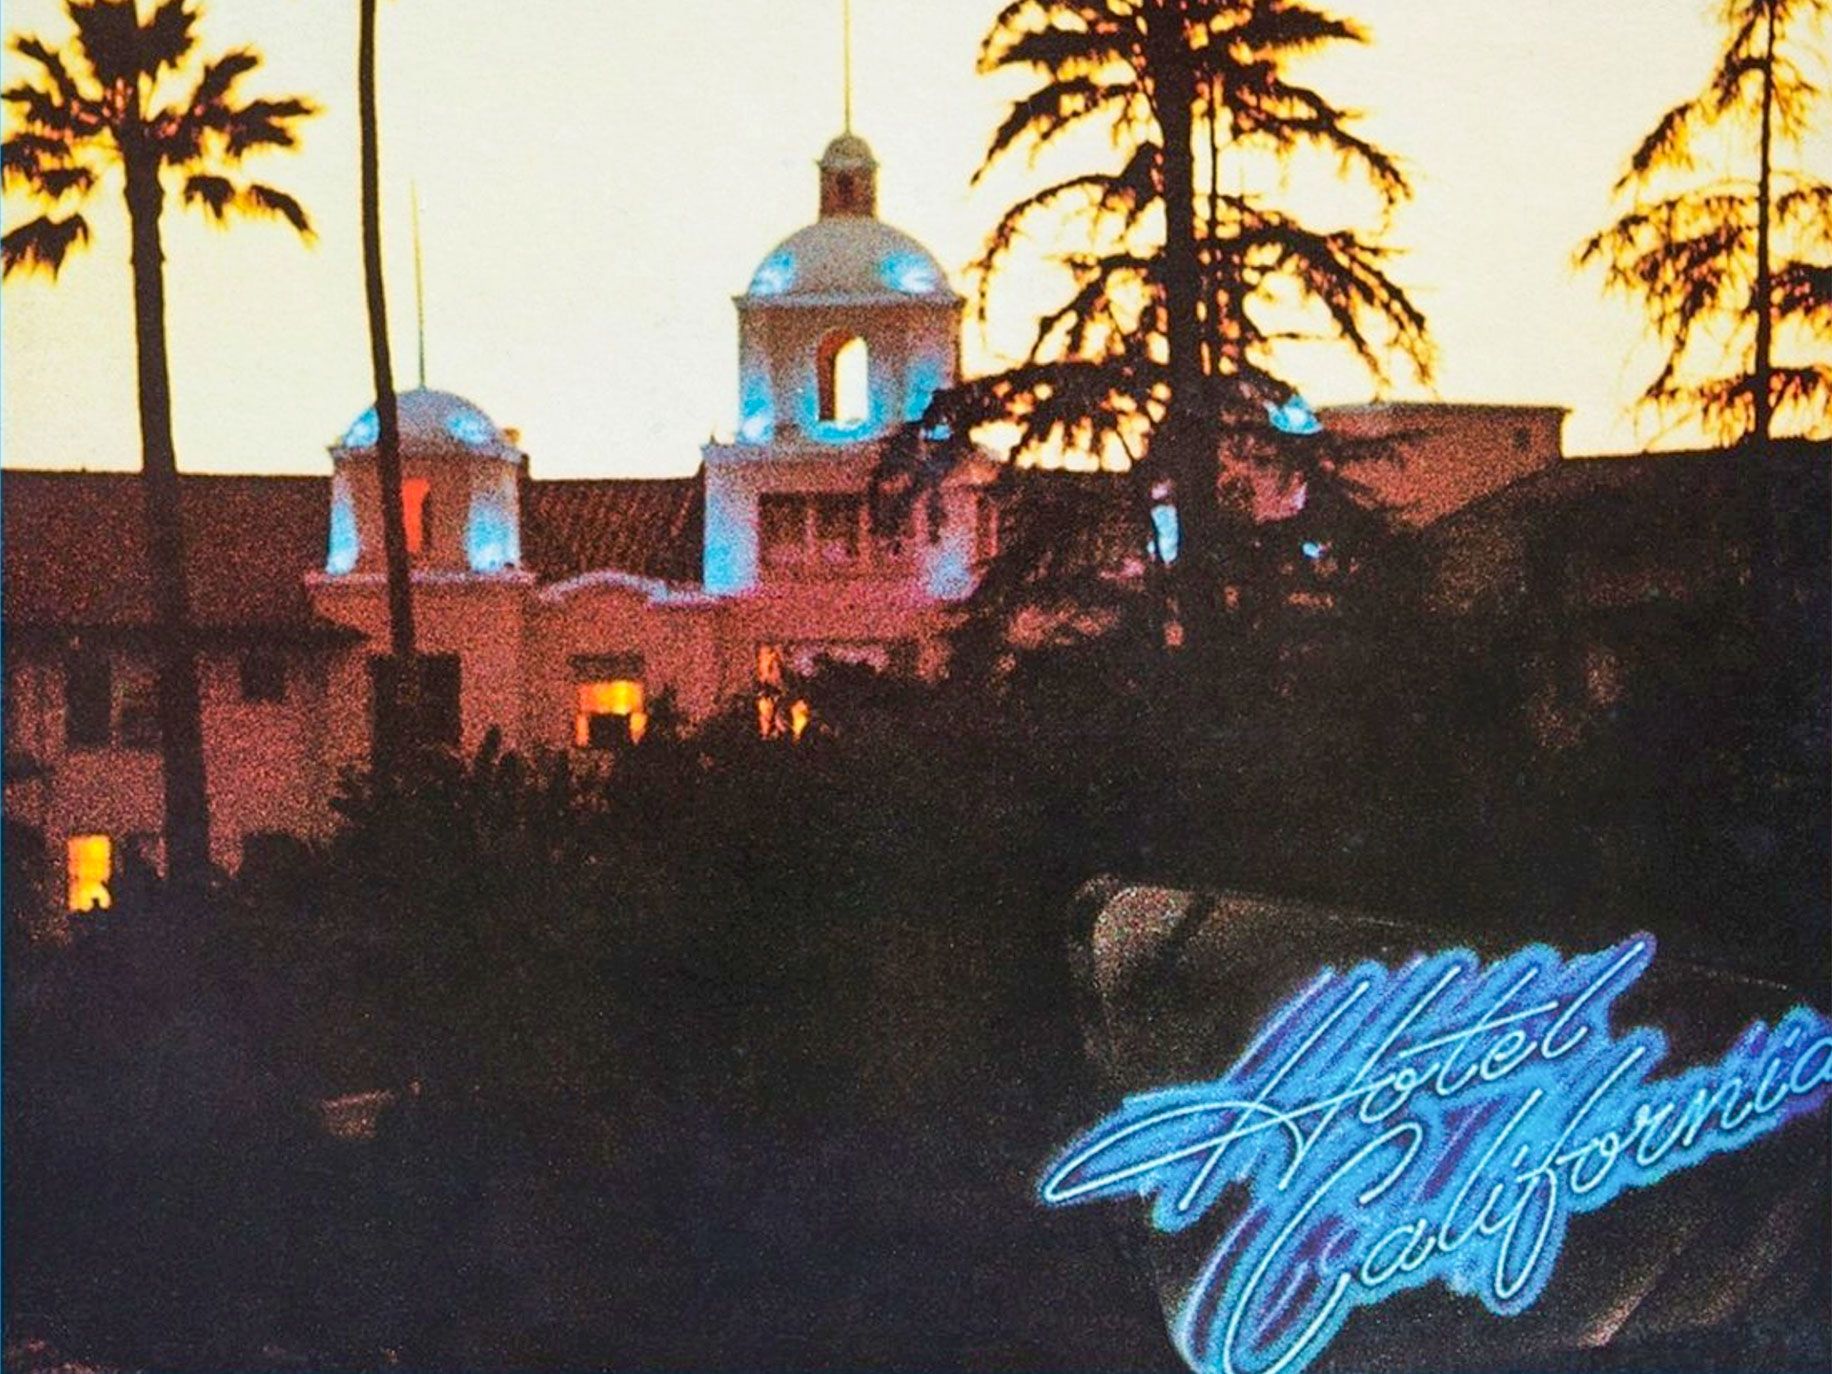 Hotel California by the Eagles